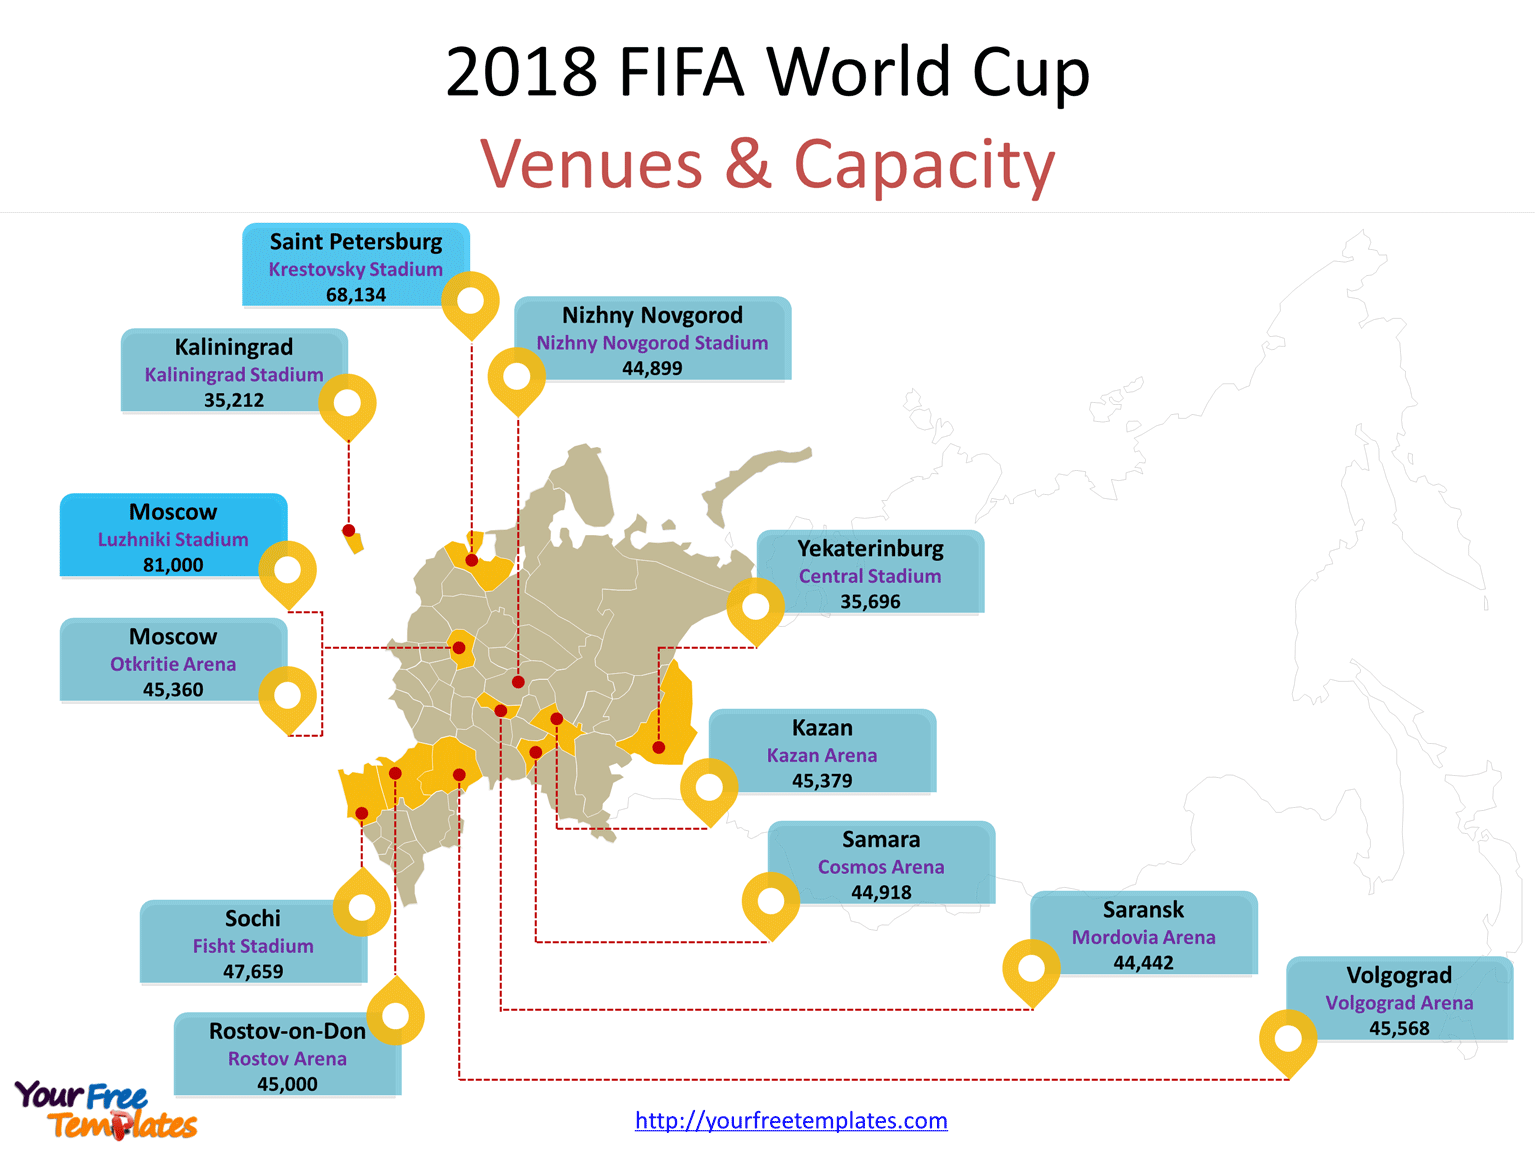 2018 FIFA World Cup with Venues & Capacity in the 2018 FIFA World Cup PowerPoint templates